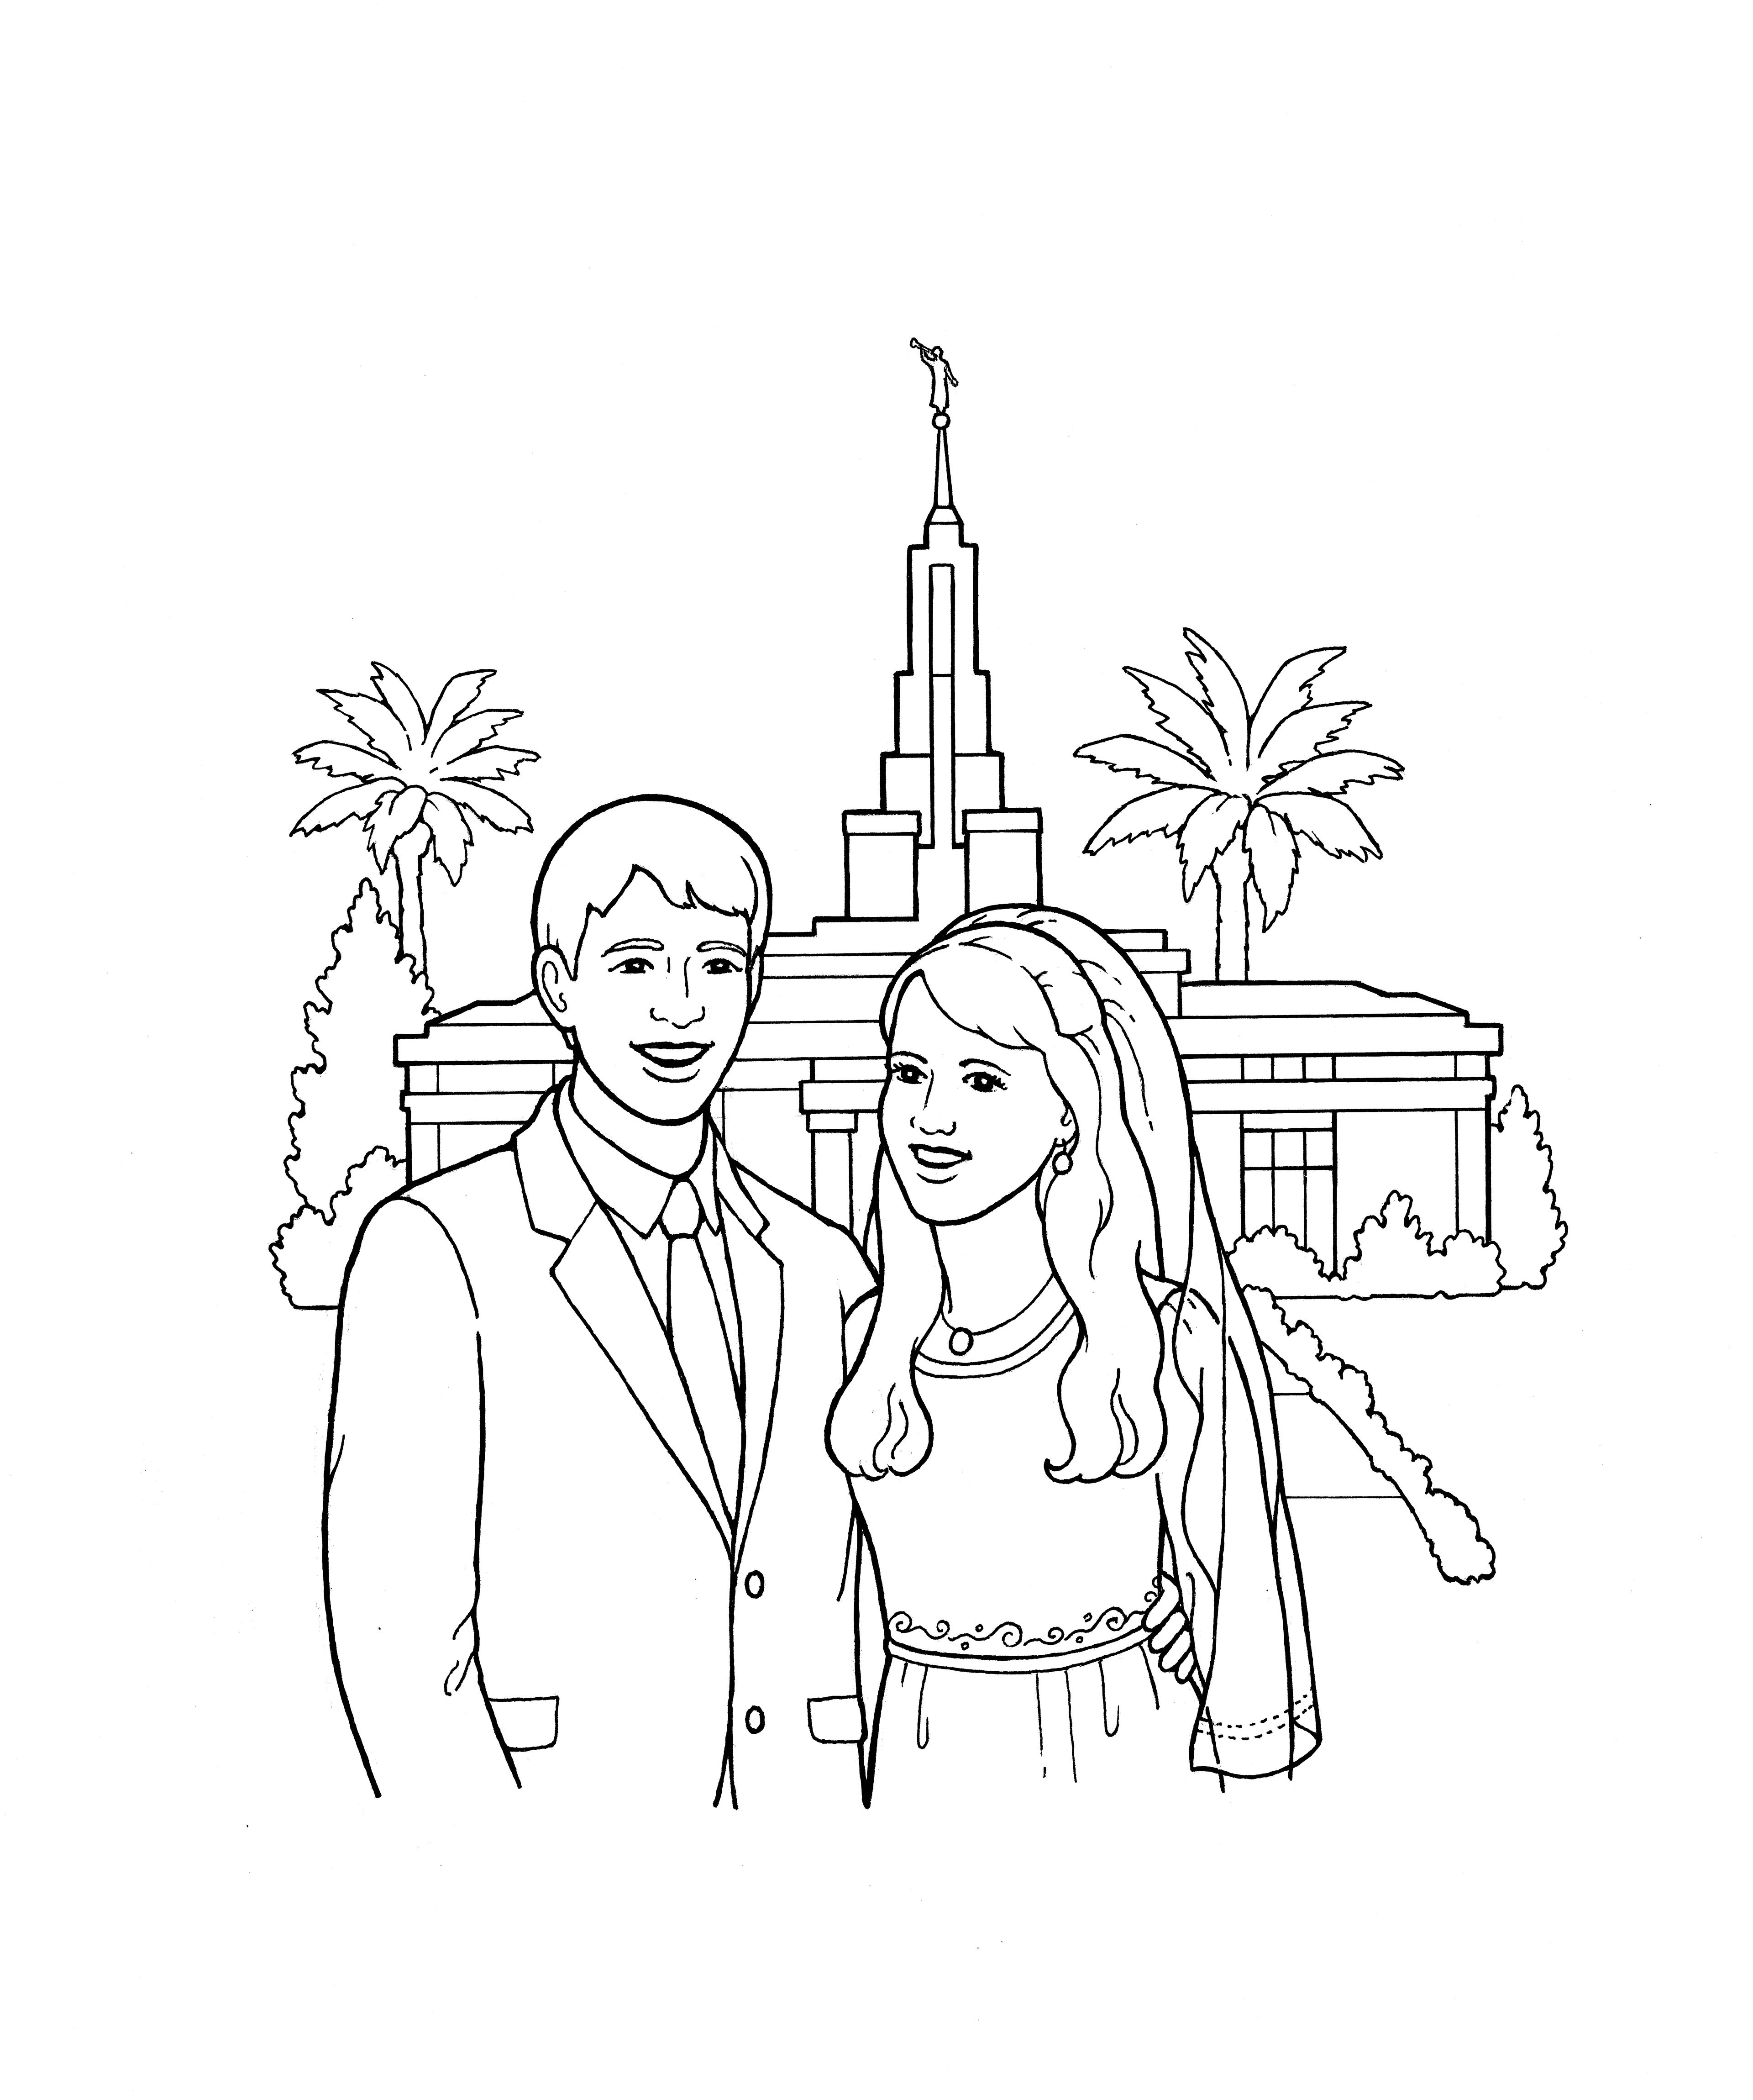 An illustration of a bride and groom standing in front of a temple.